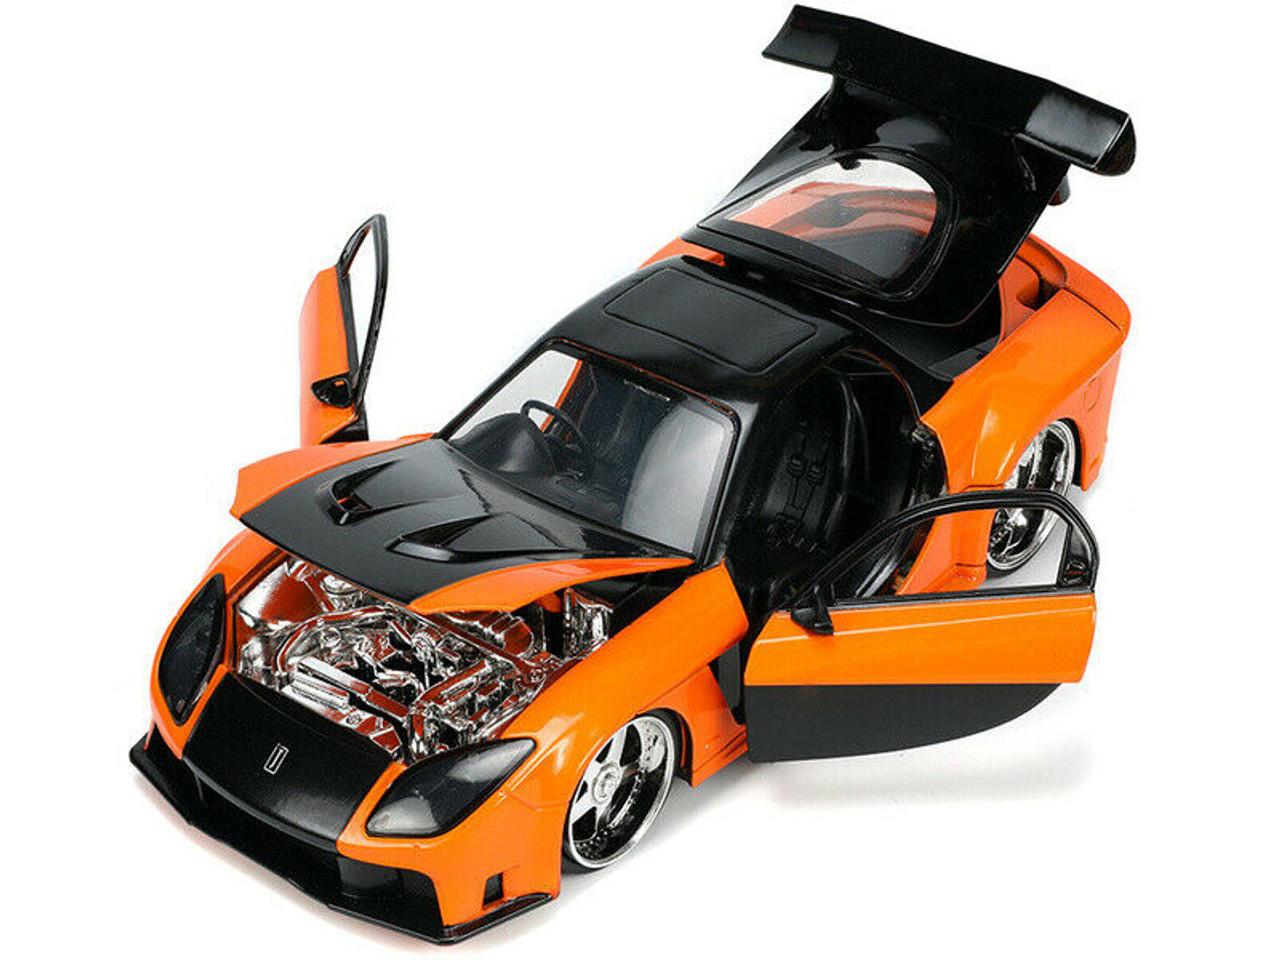 1/24 Jada 1995 Mazda RX-7 Widebody RHD (Right Hand Drive) Orange Metallic and Black with Han Diecast Figurine "The Fast and the Furious: Tokyo Drift" (2006) Movie Diecast Model Car